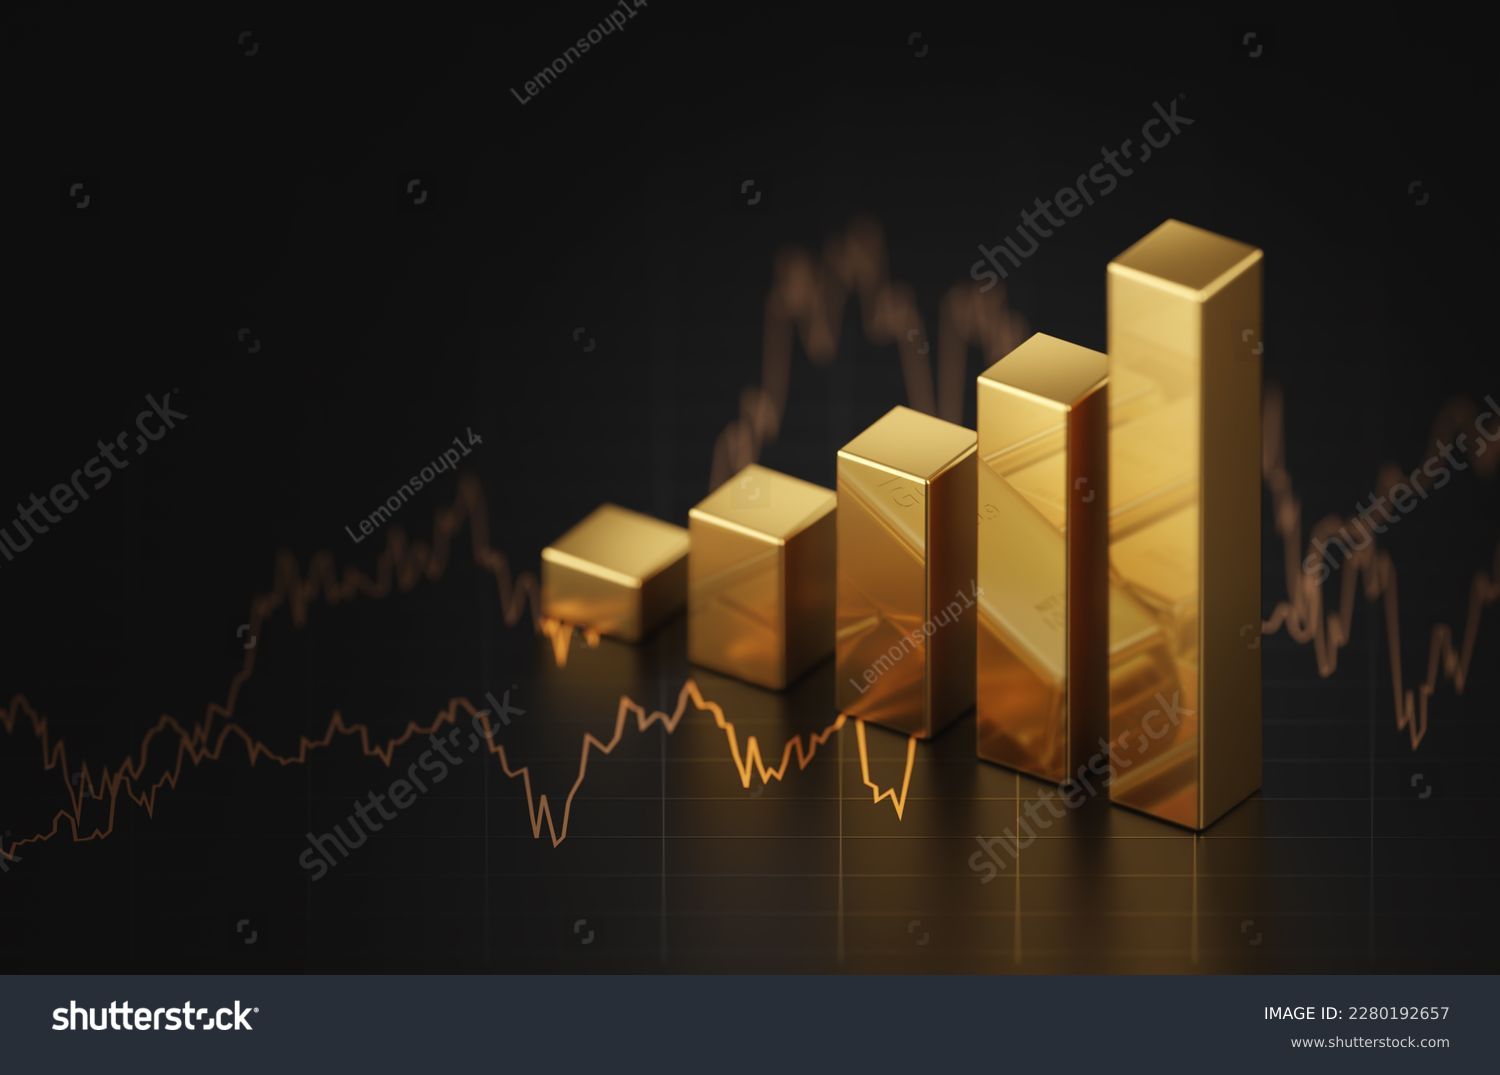 Growth gold bar financial investment stock diagram on 3d profit graph background of global economy trade price business market concept or capital marketing golden banking chart exchange invest value. Illustrazione stock